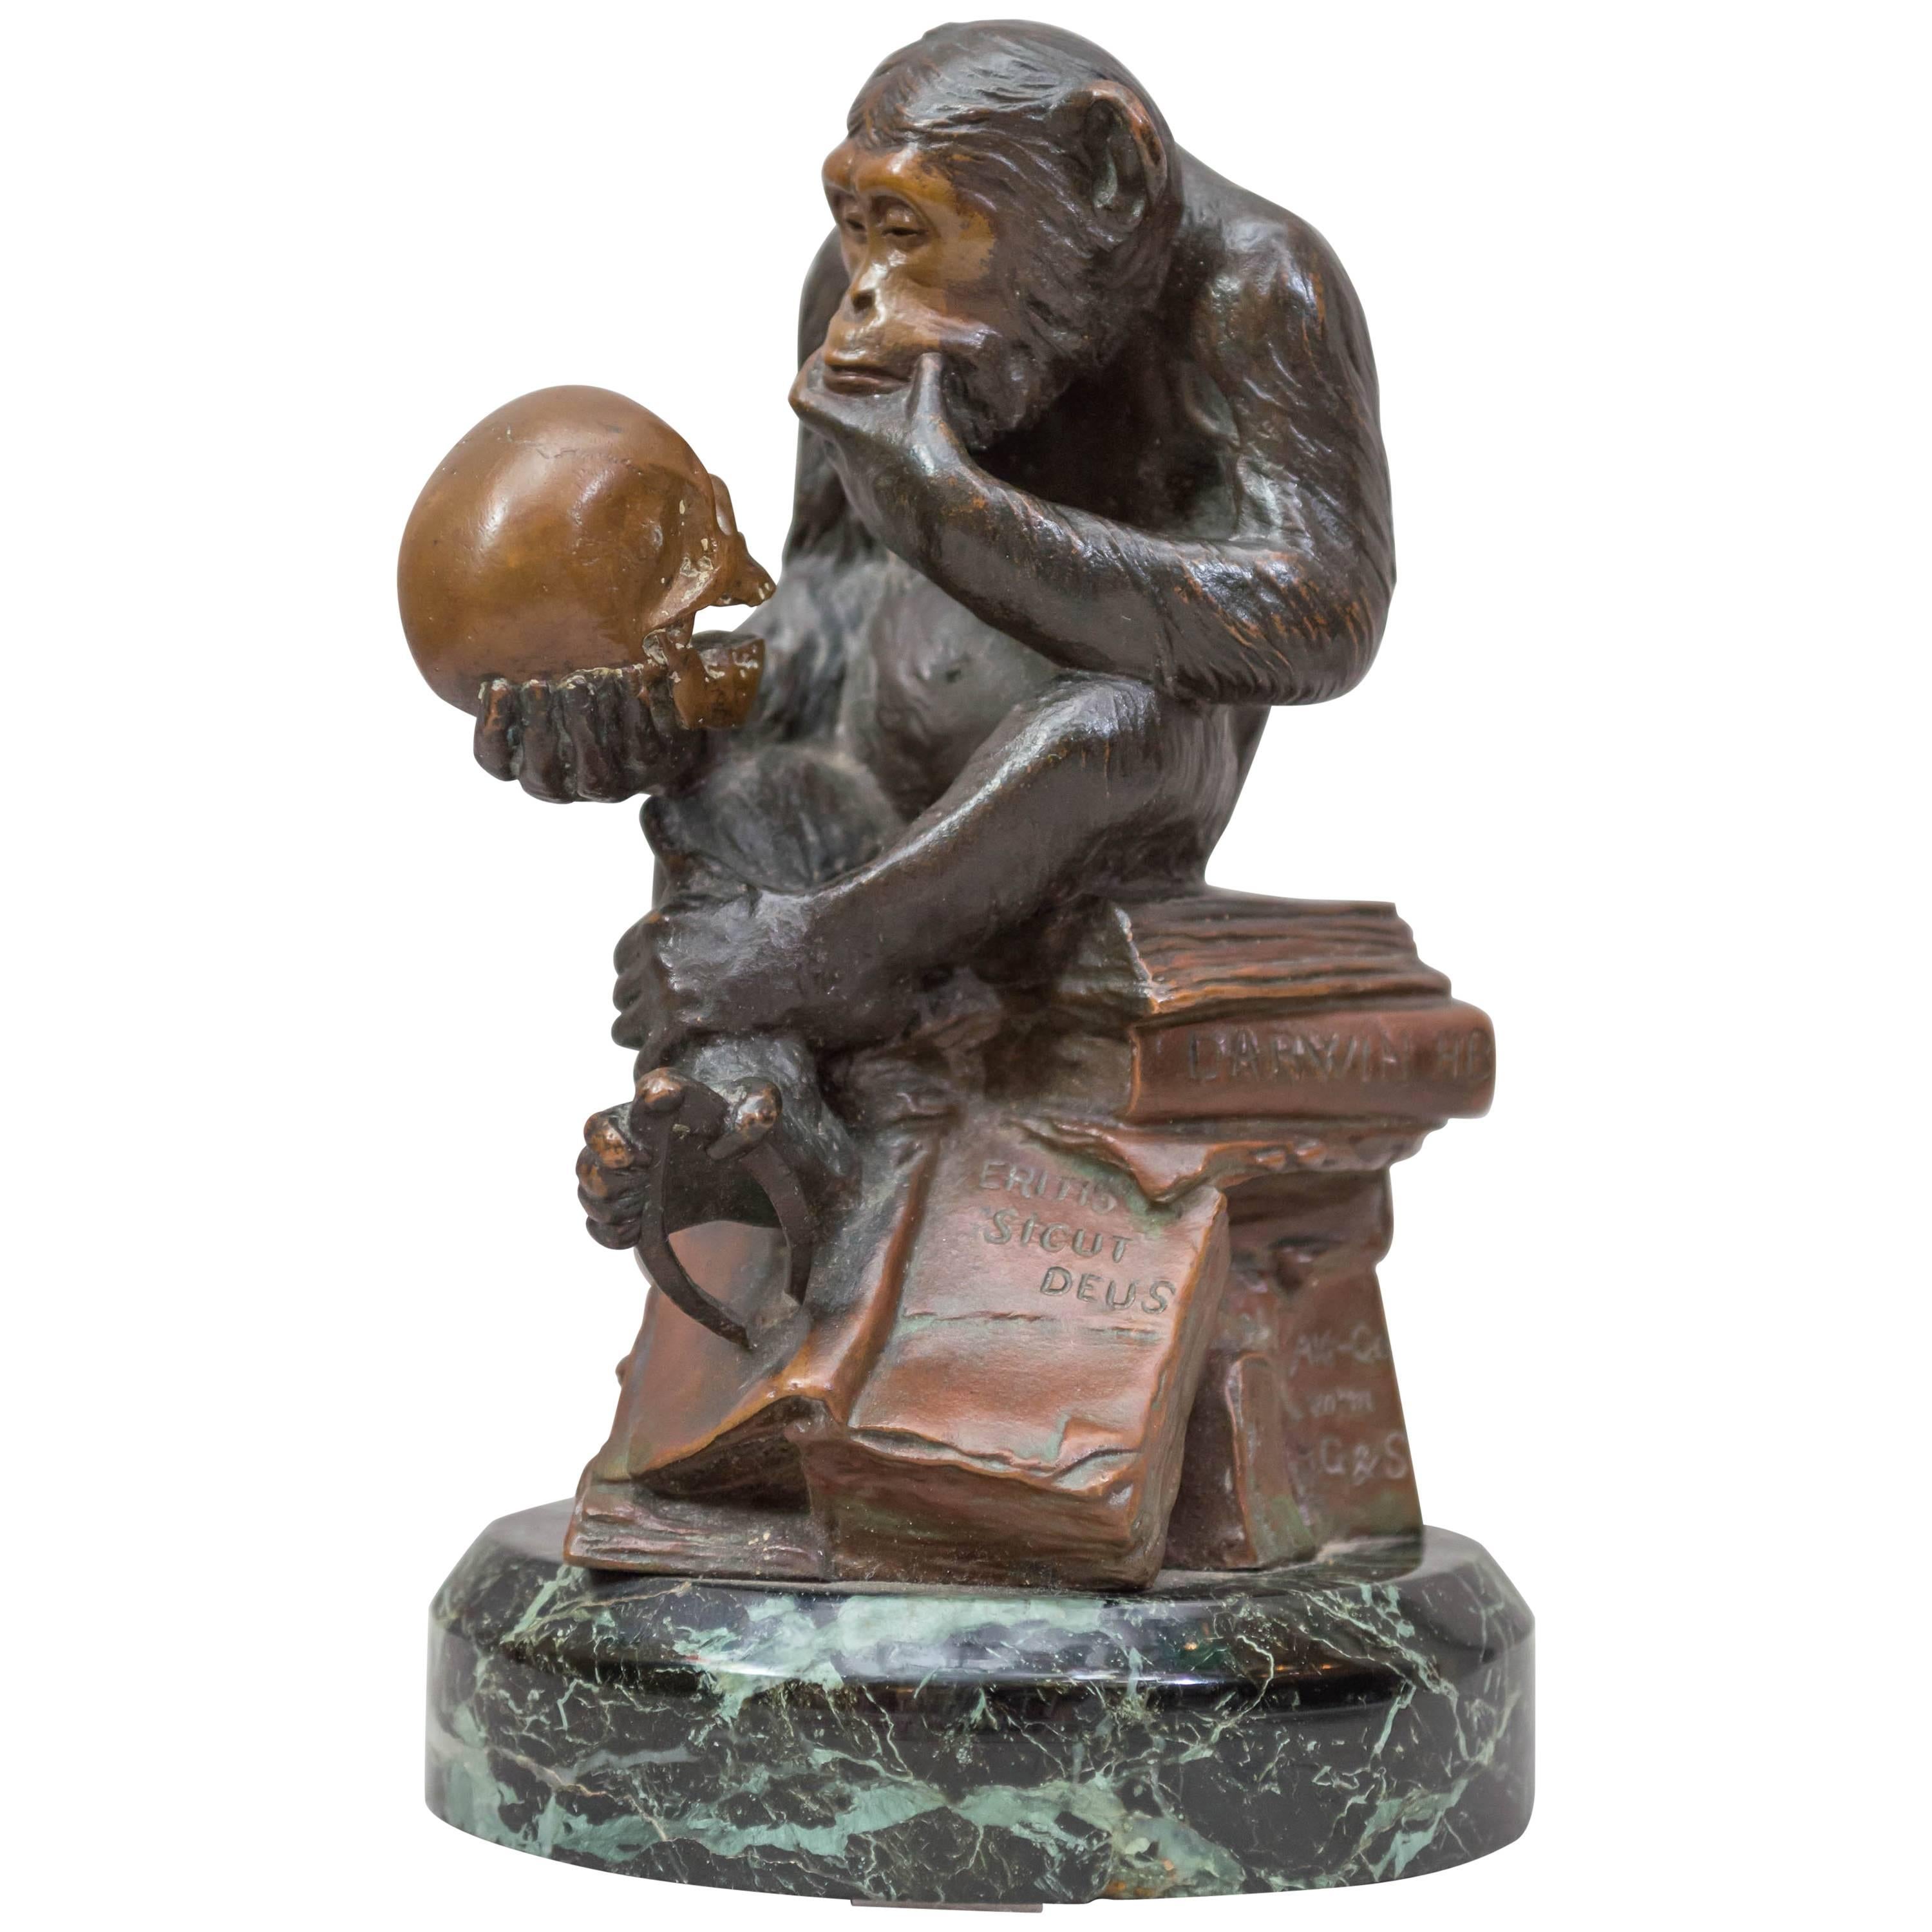 Whimsical Bronze Figure of a Monkey Studying a Skull, Darwinian Reference